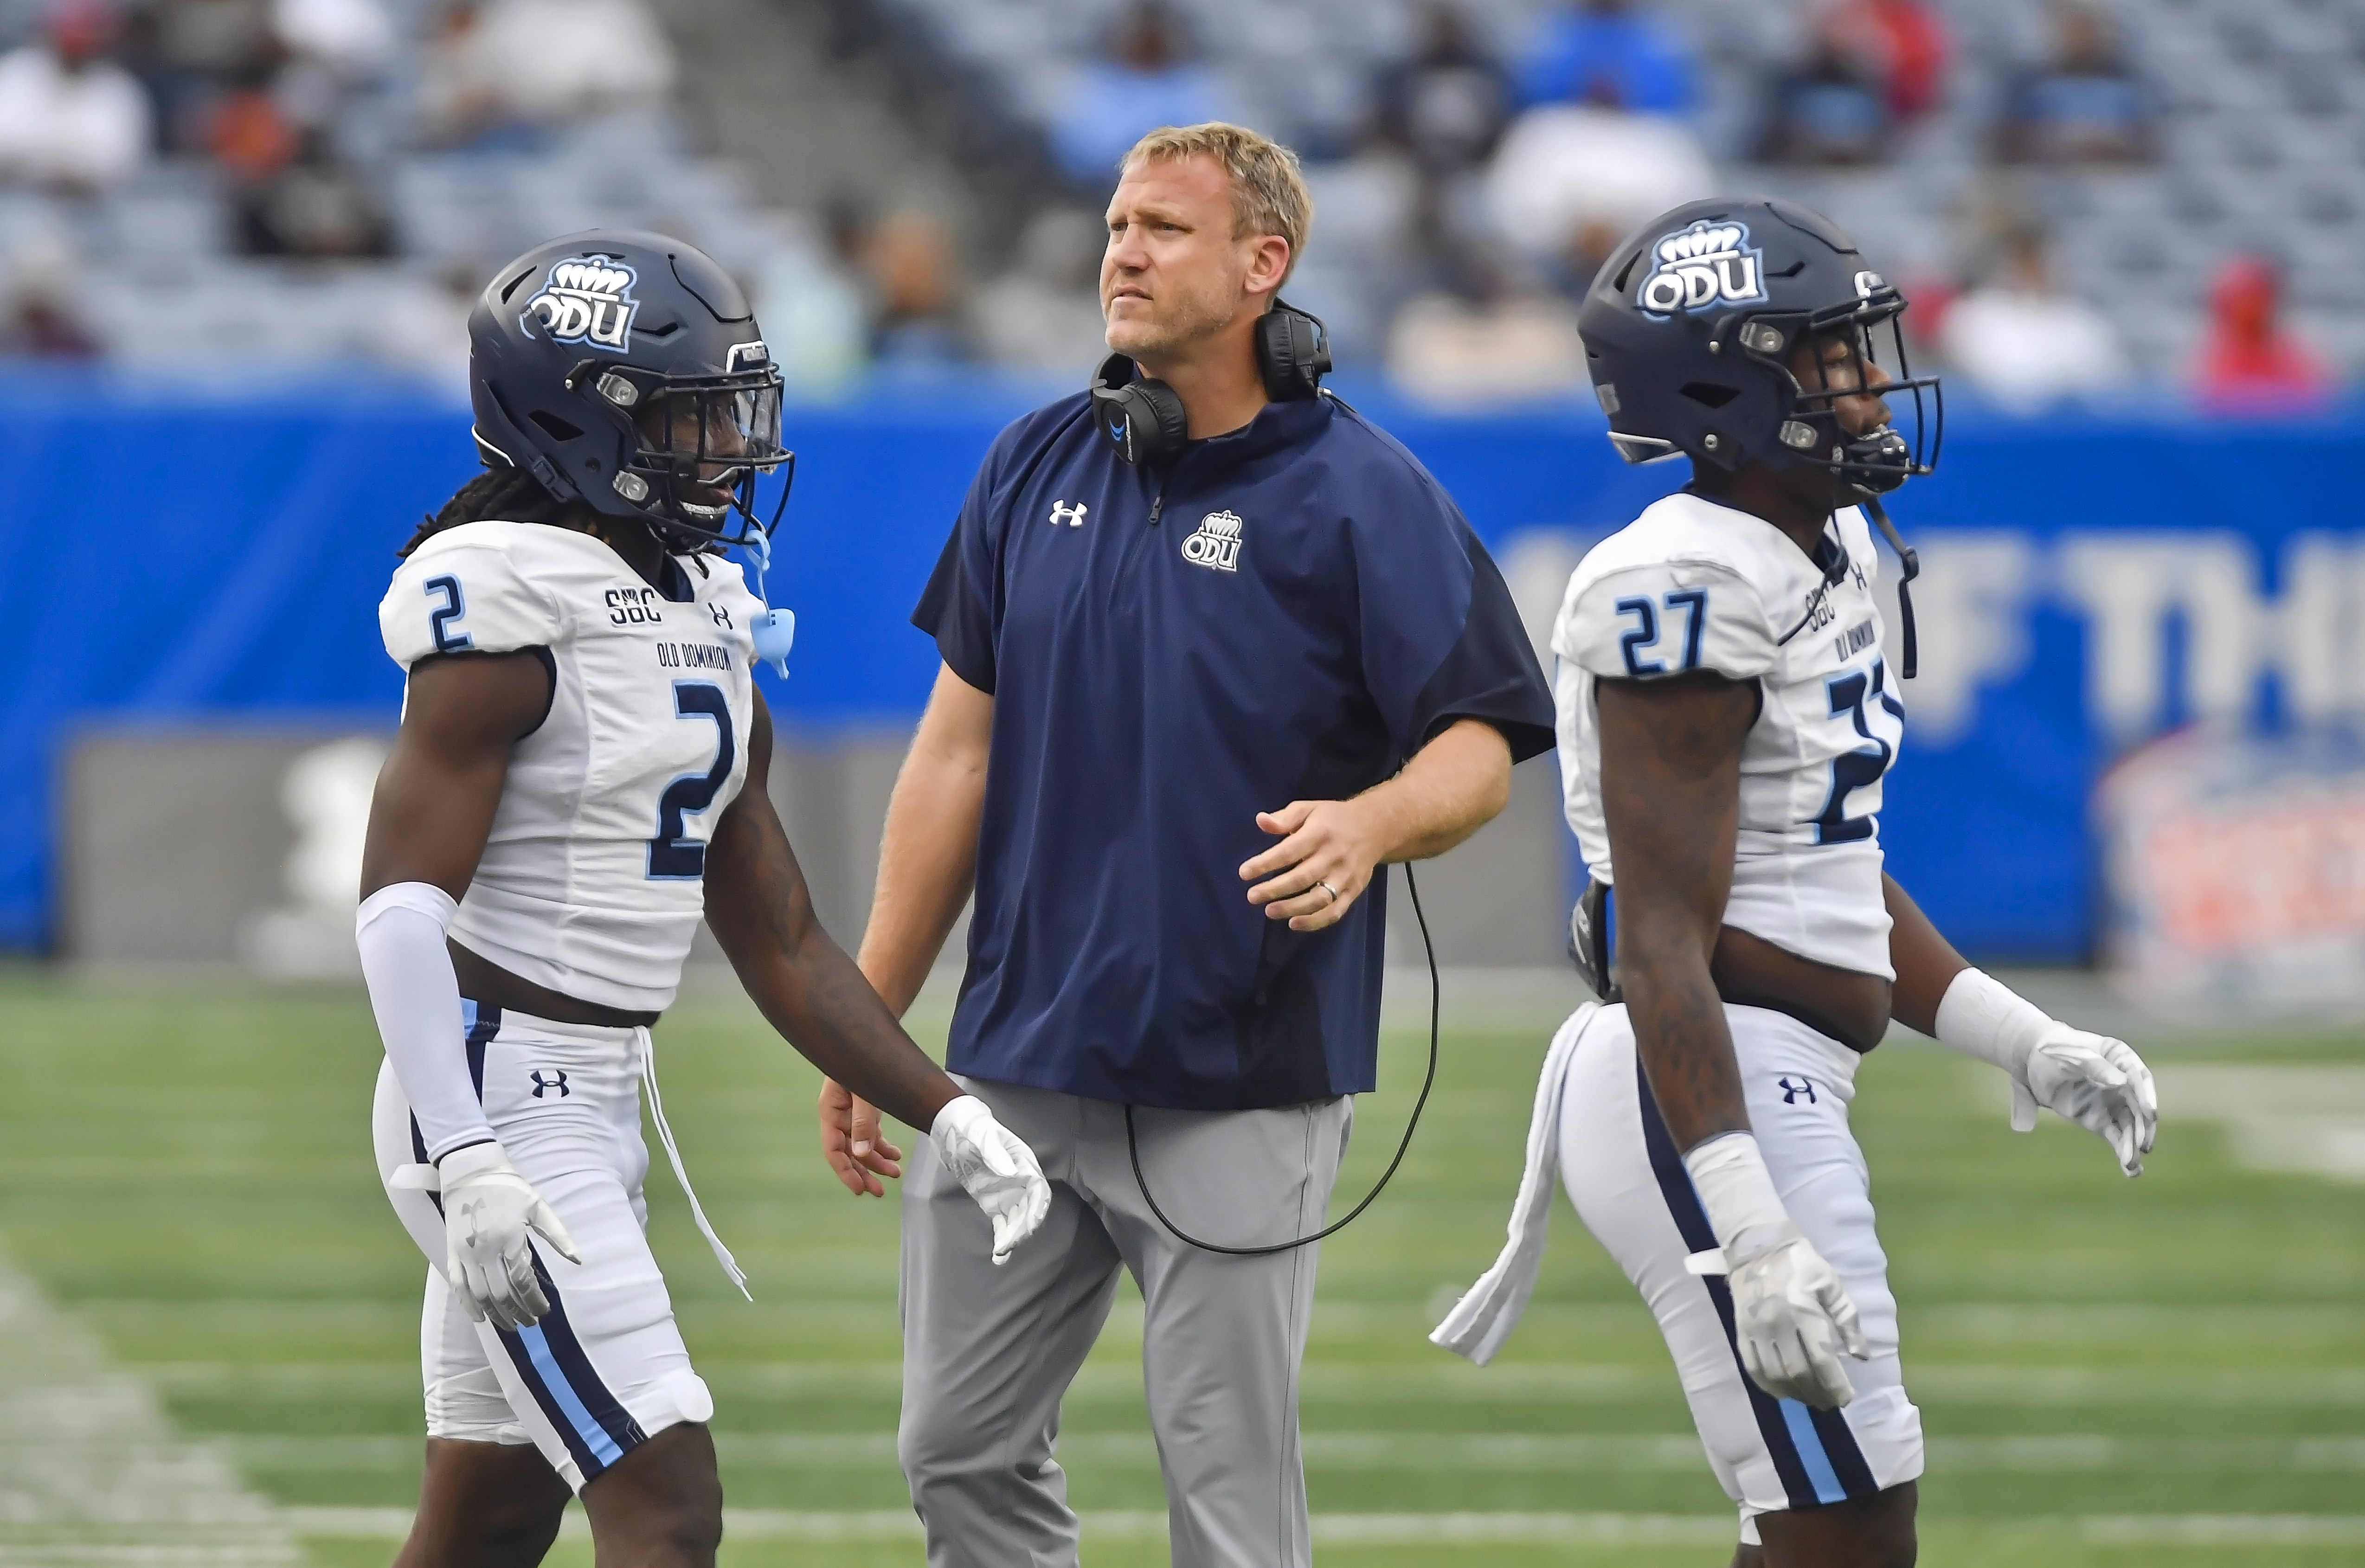 COLLEGE FOOTBALL: OCT 29 Old Dominion at Georgia State